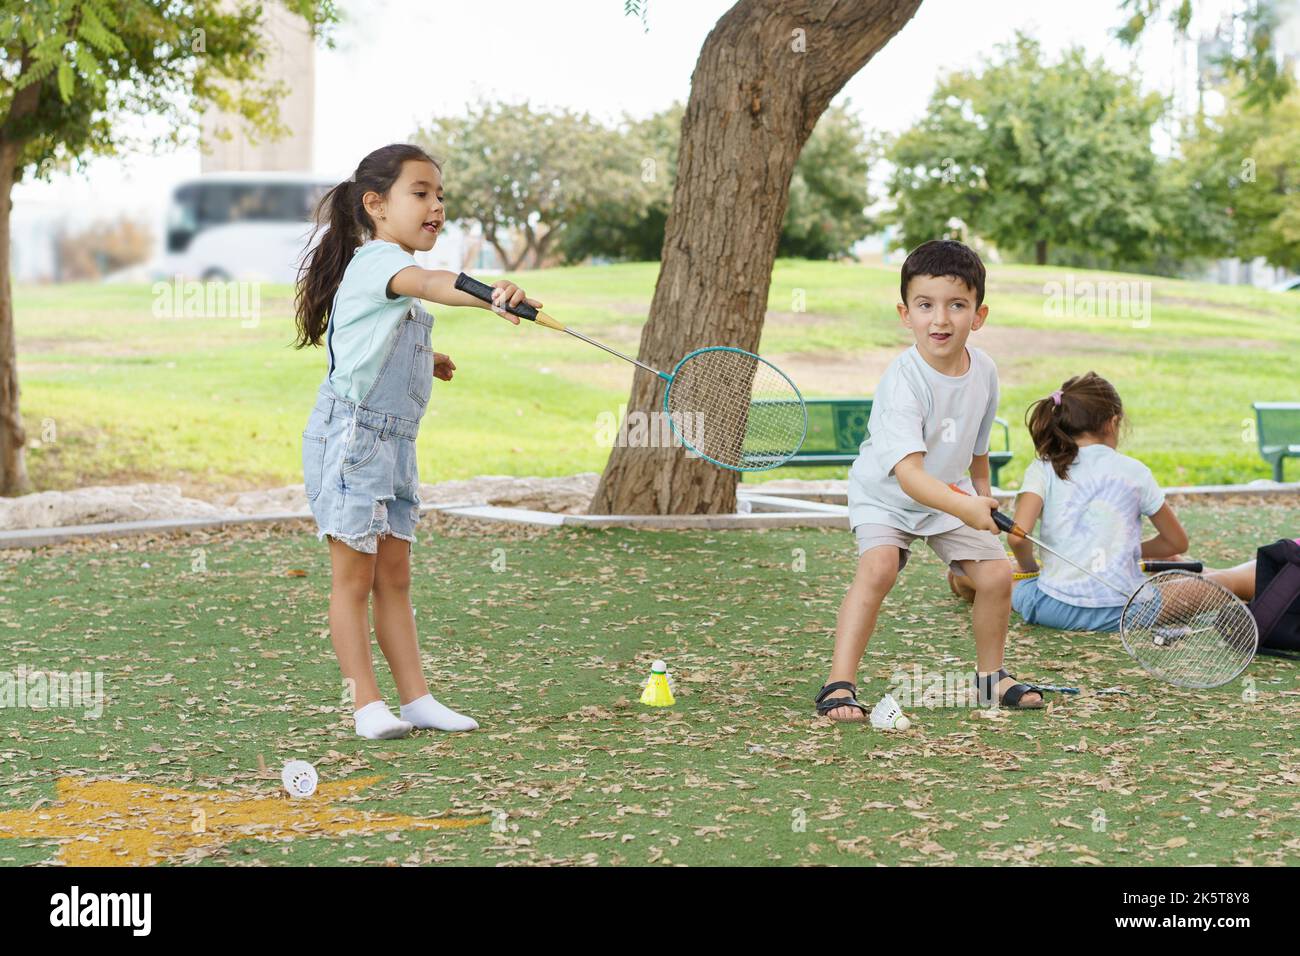 Children playing badminton in park. Young pretty girl and boy playing badminton on summer day. They are about to serve the birdie over the net and so they have a look of concentration on their face. Stock Photo